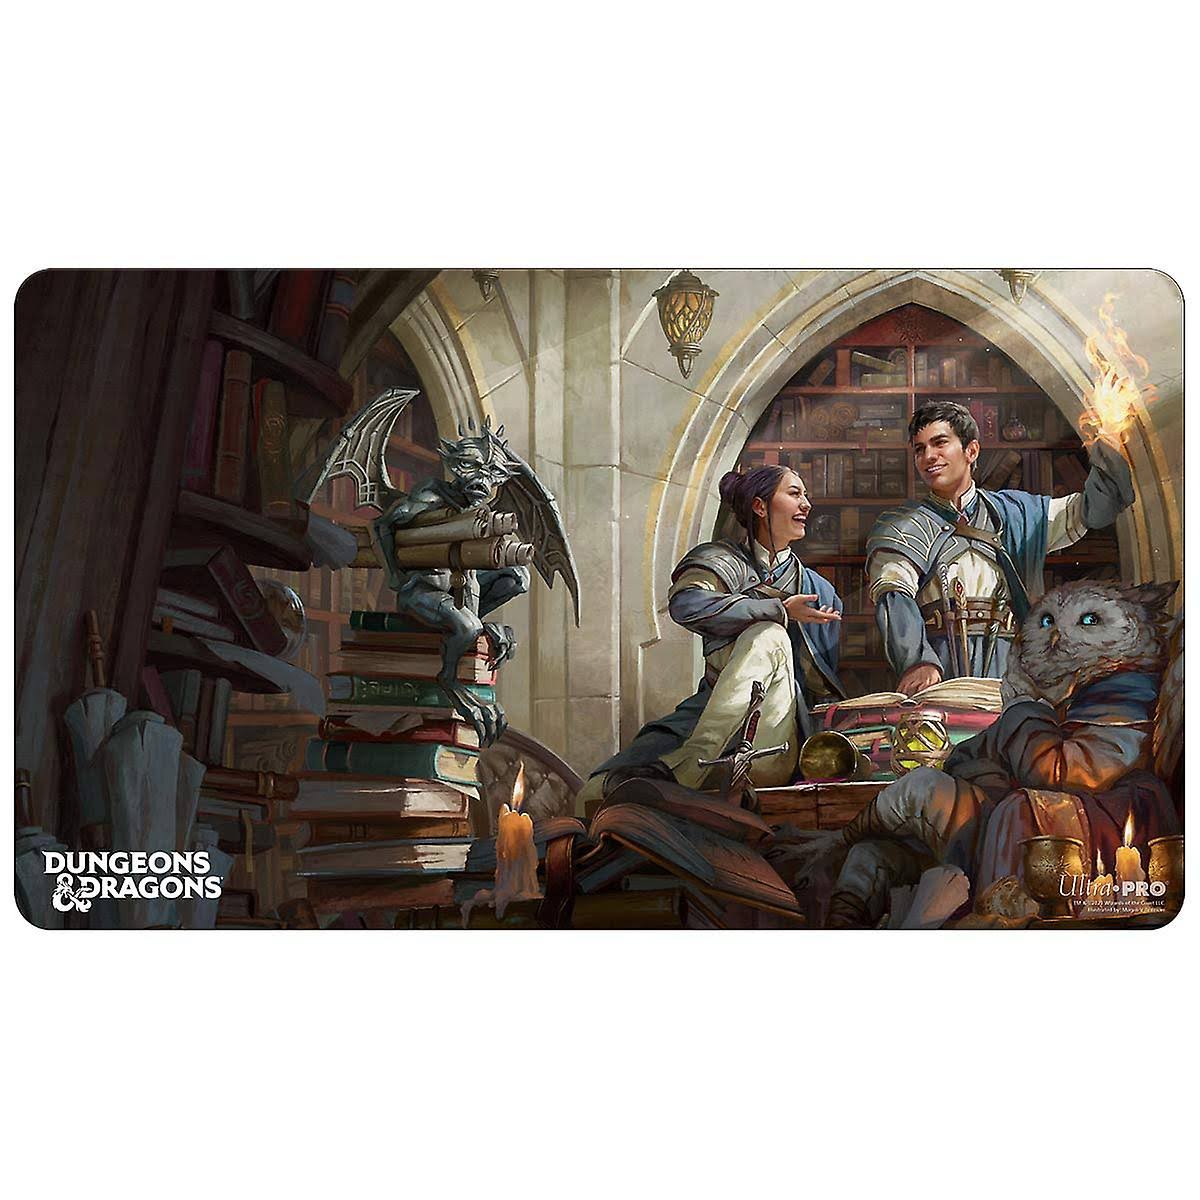 Dungeons & Dragons Cover Series Strixhaven Playmat